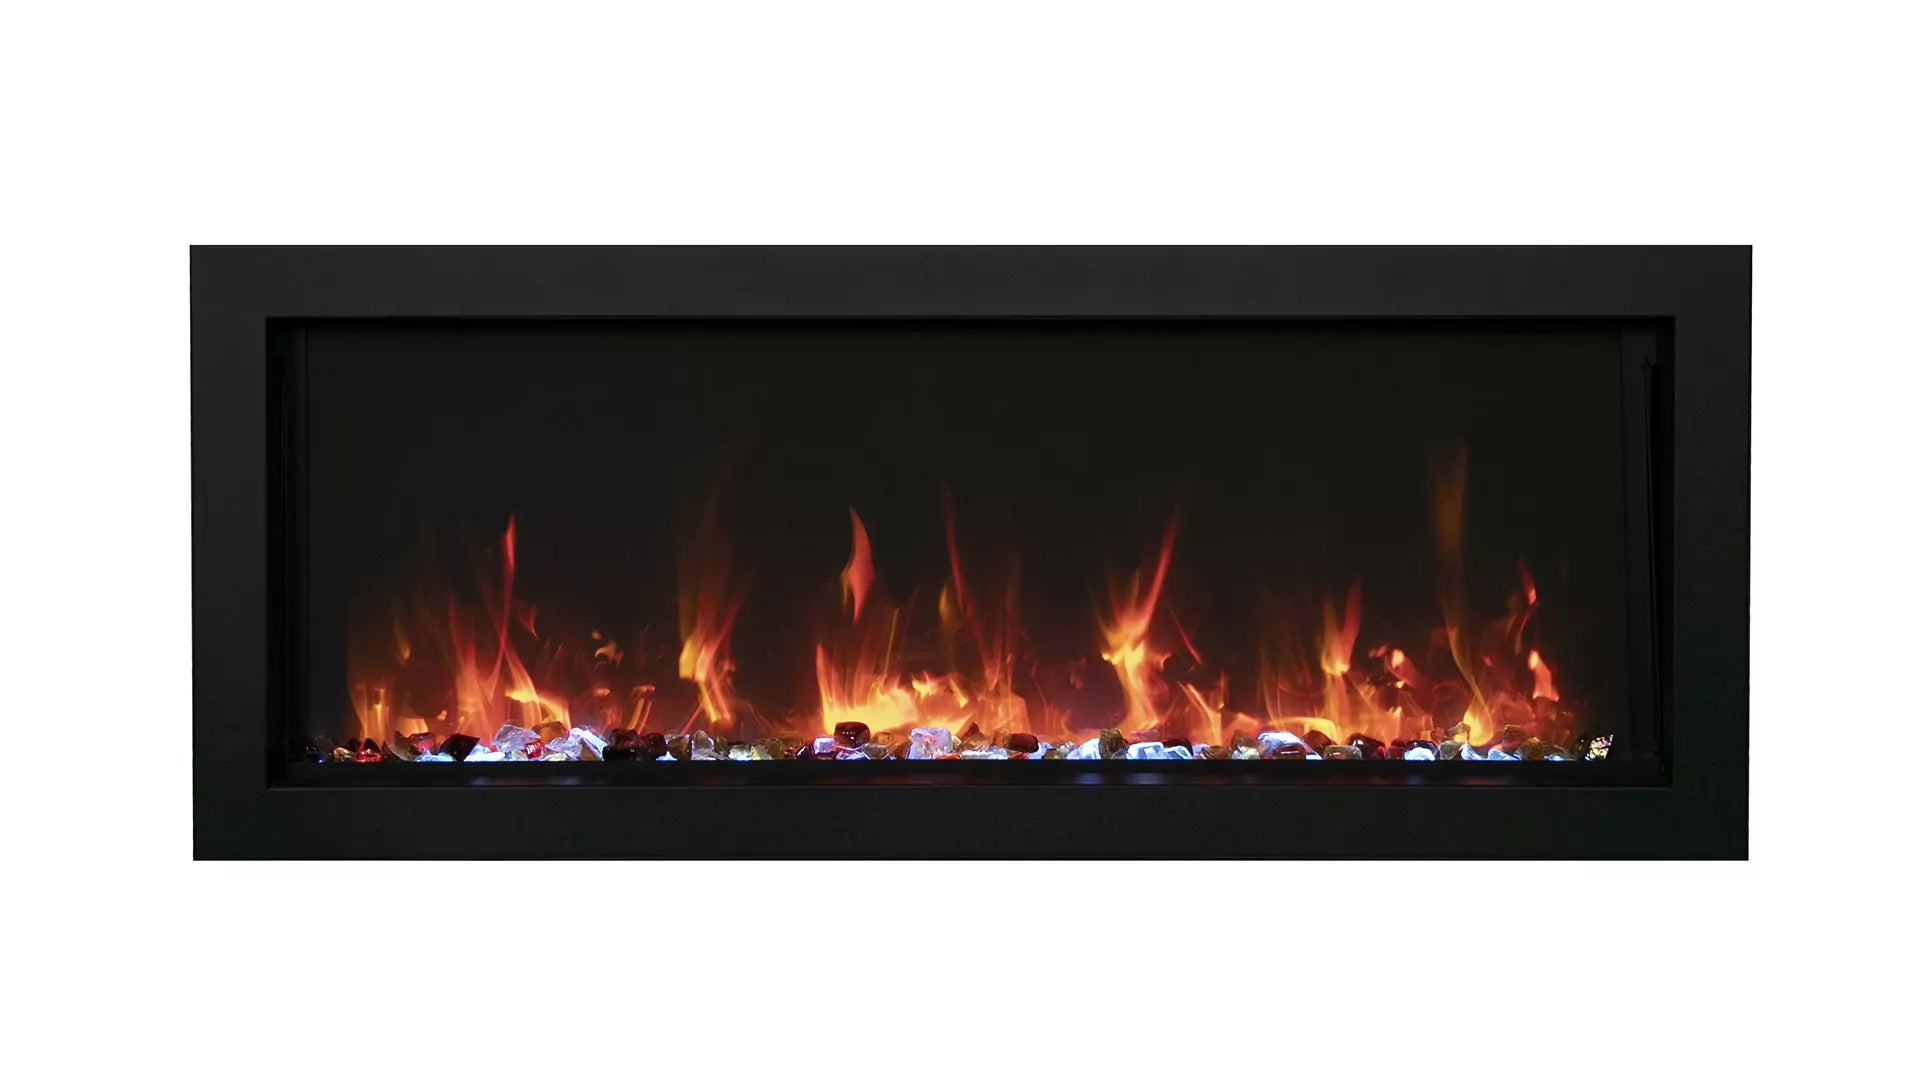 Amantii Panorama Extra Slim, Built-in Only with Black Steel Surround Electric Fireplace